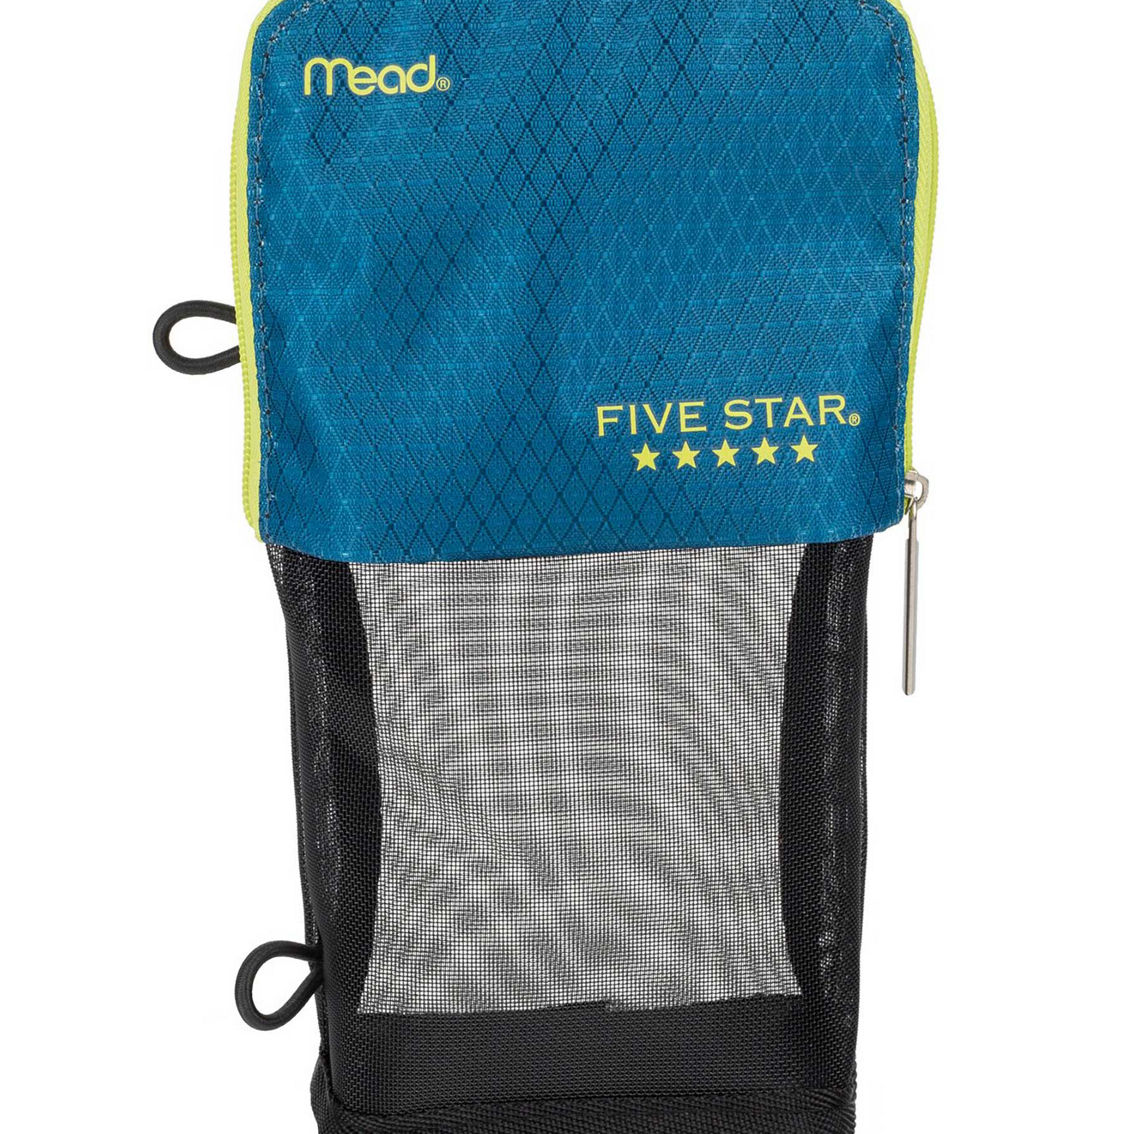 Five Star Stand 'N Store Pencil Pouch, Assorted Colors - Image 3 of 8